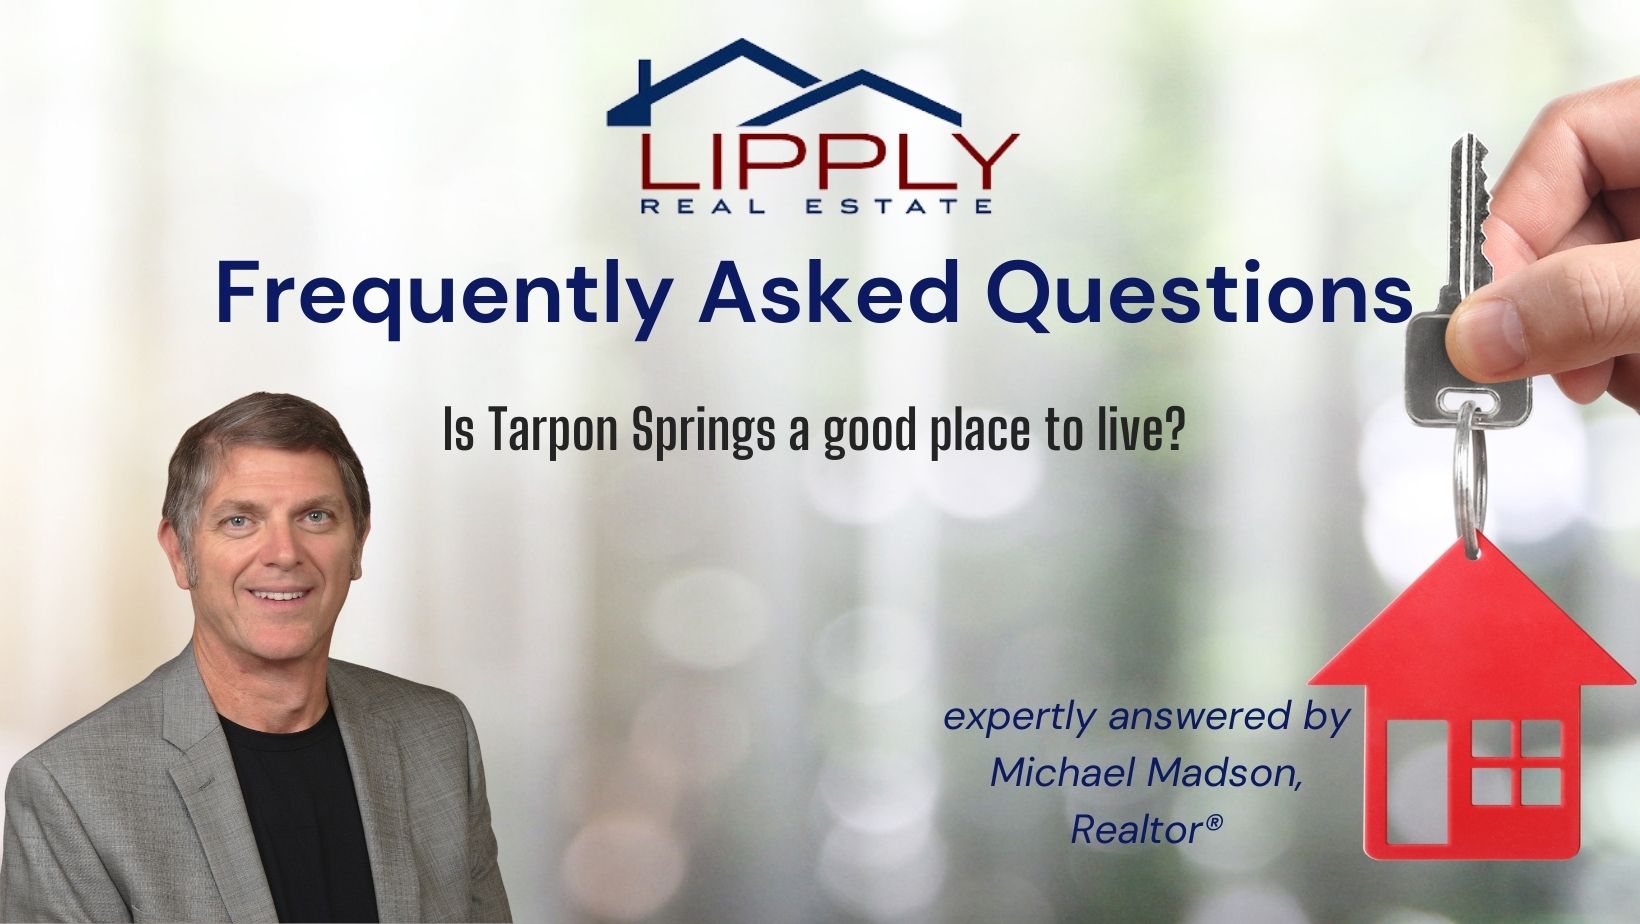 Is Tarpon Springs a good place to live?